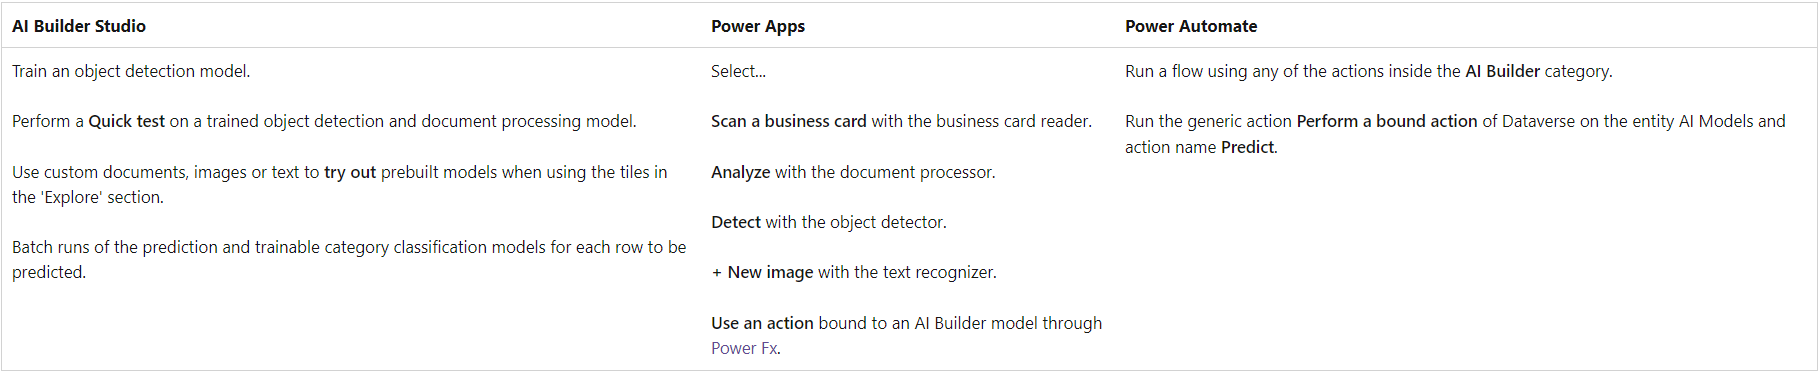 licensing guide for AI Builders in Power Platform